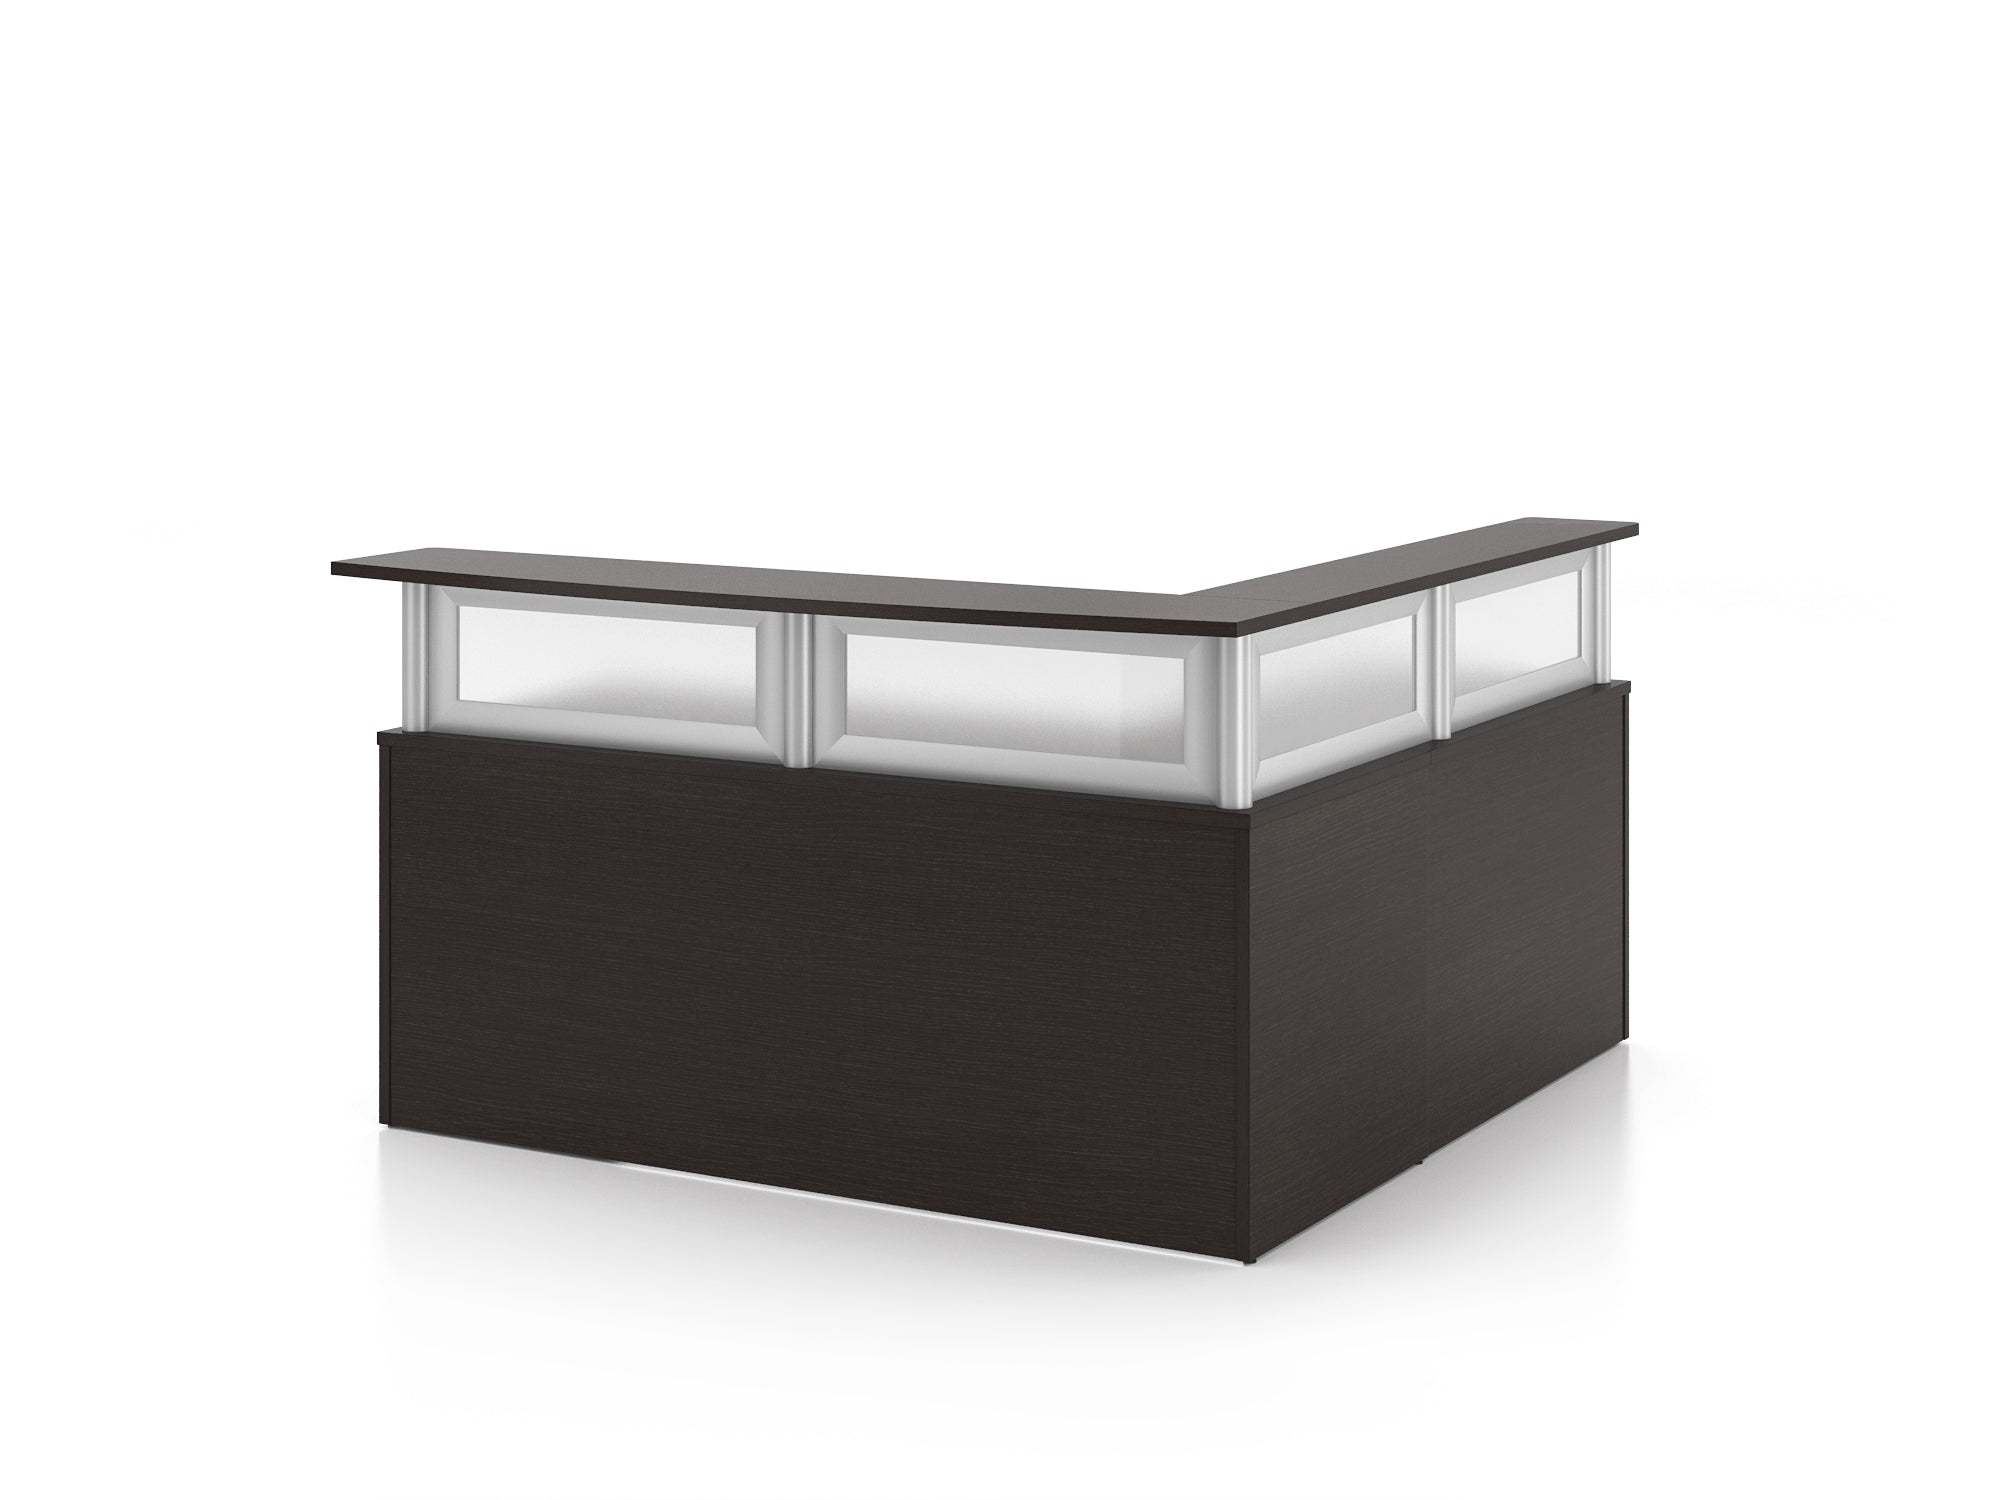 CA238R - Deluxe Series L Shape Reception Desk by Candex